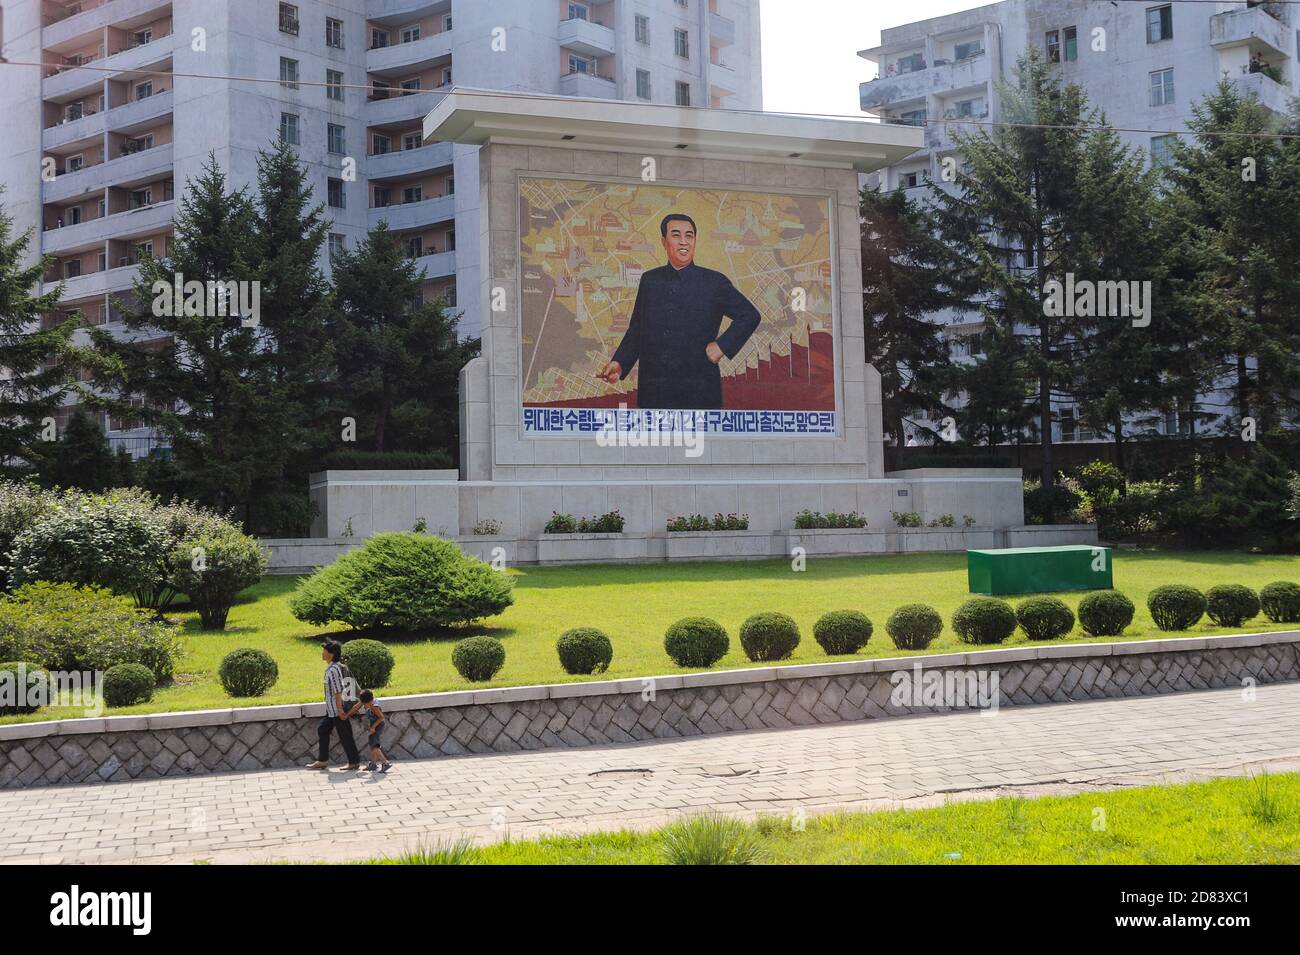 08.08.2012, Pyongyang, North Korea, Asia - An everyday street scene depicts a memorial with the portrait of Kim Il Sung and residential buildings. Stock Photo